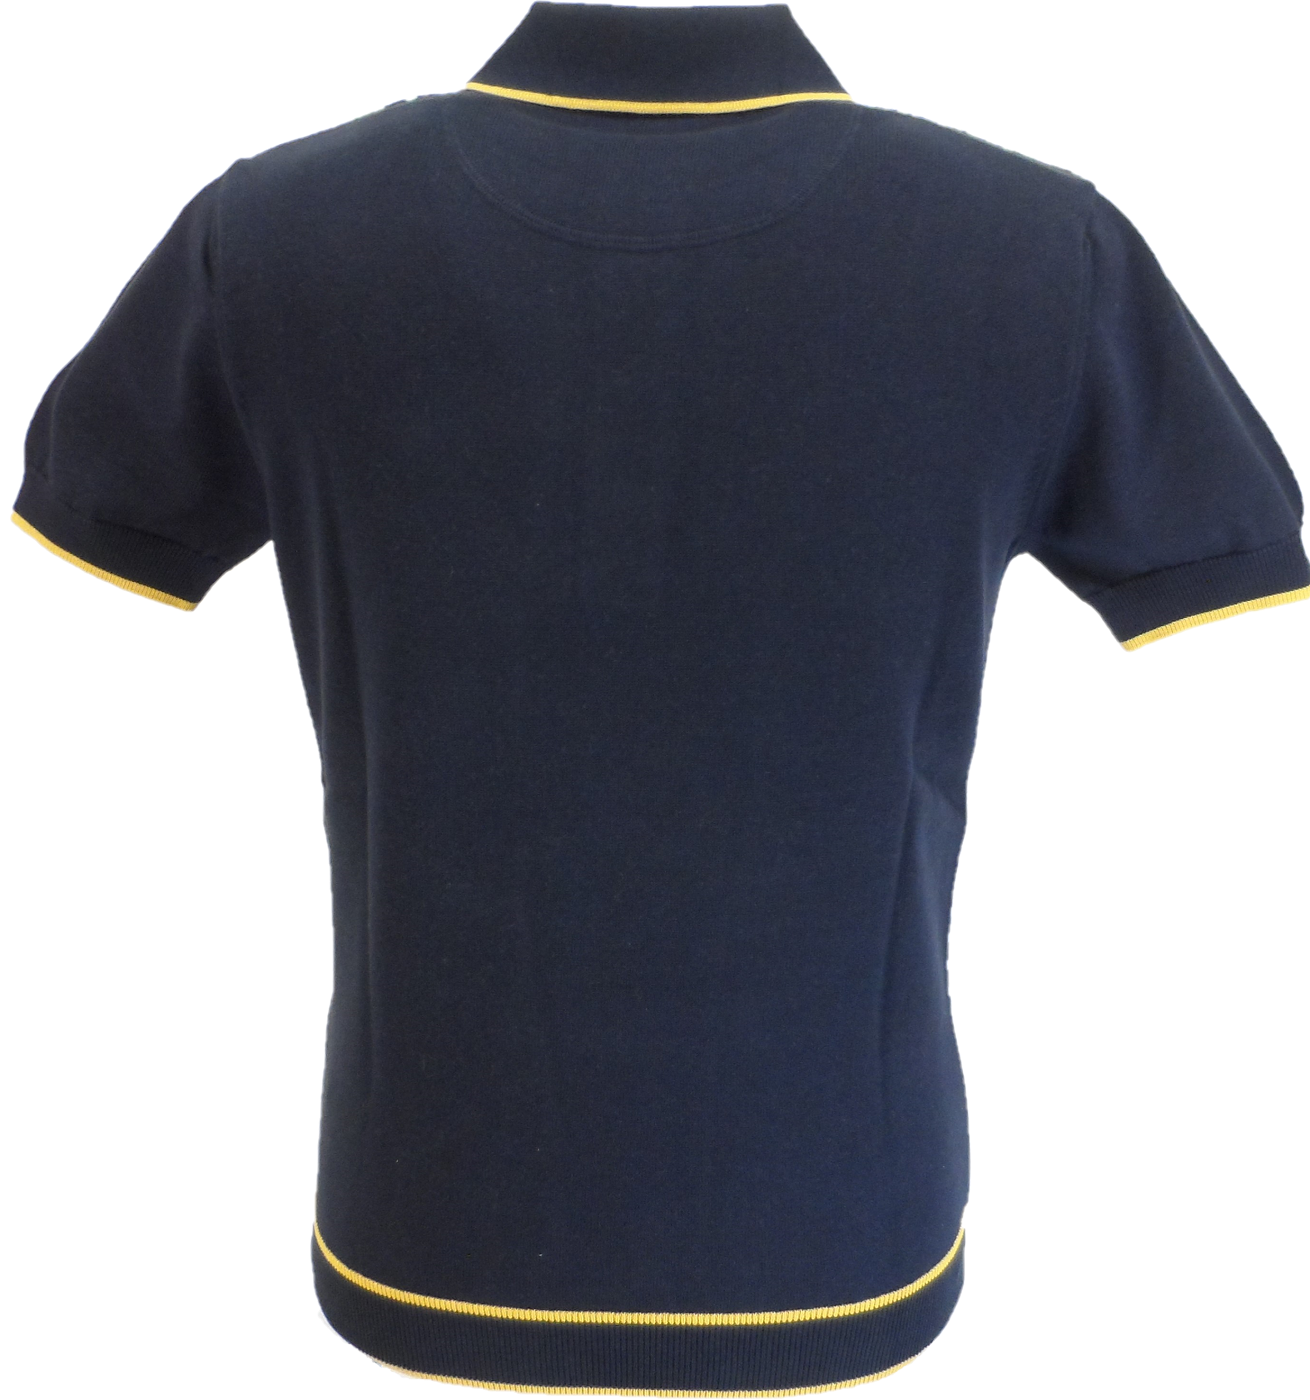 Trojan Mens Navy Blue Squares Cotton Fine Gauge Knitted Polo Shirt